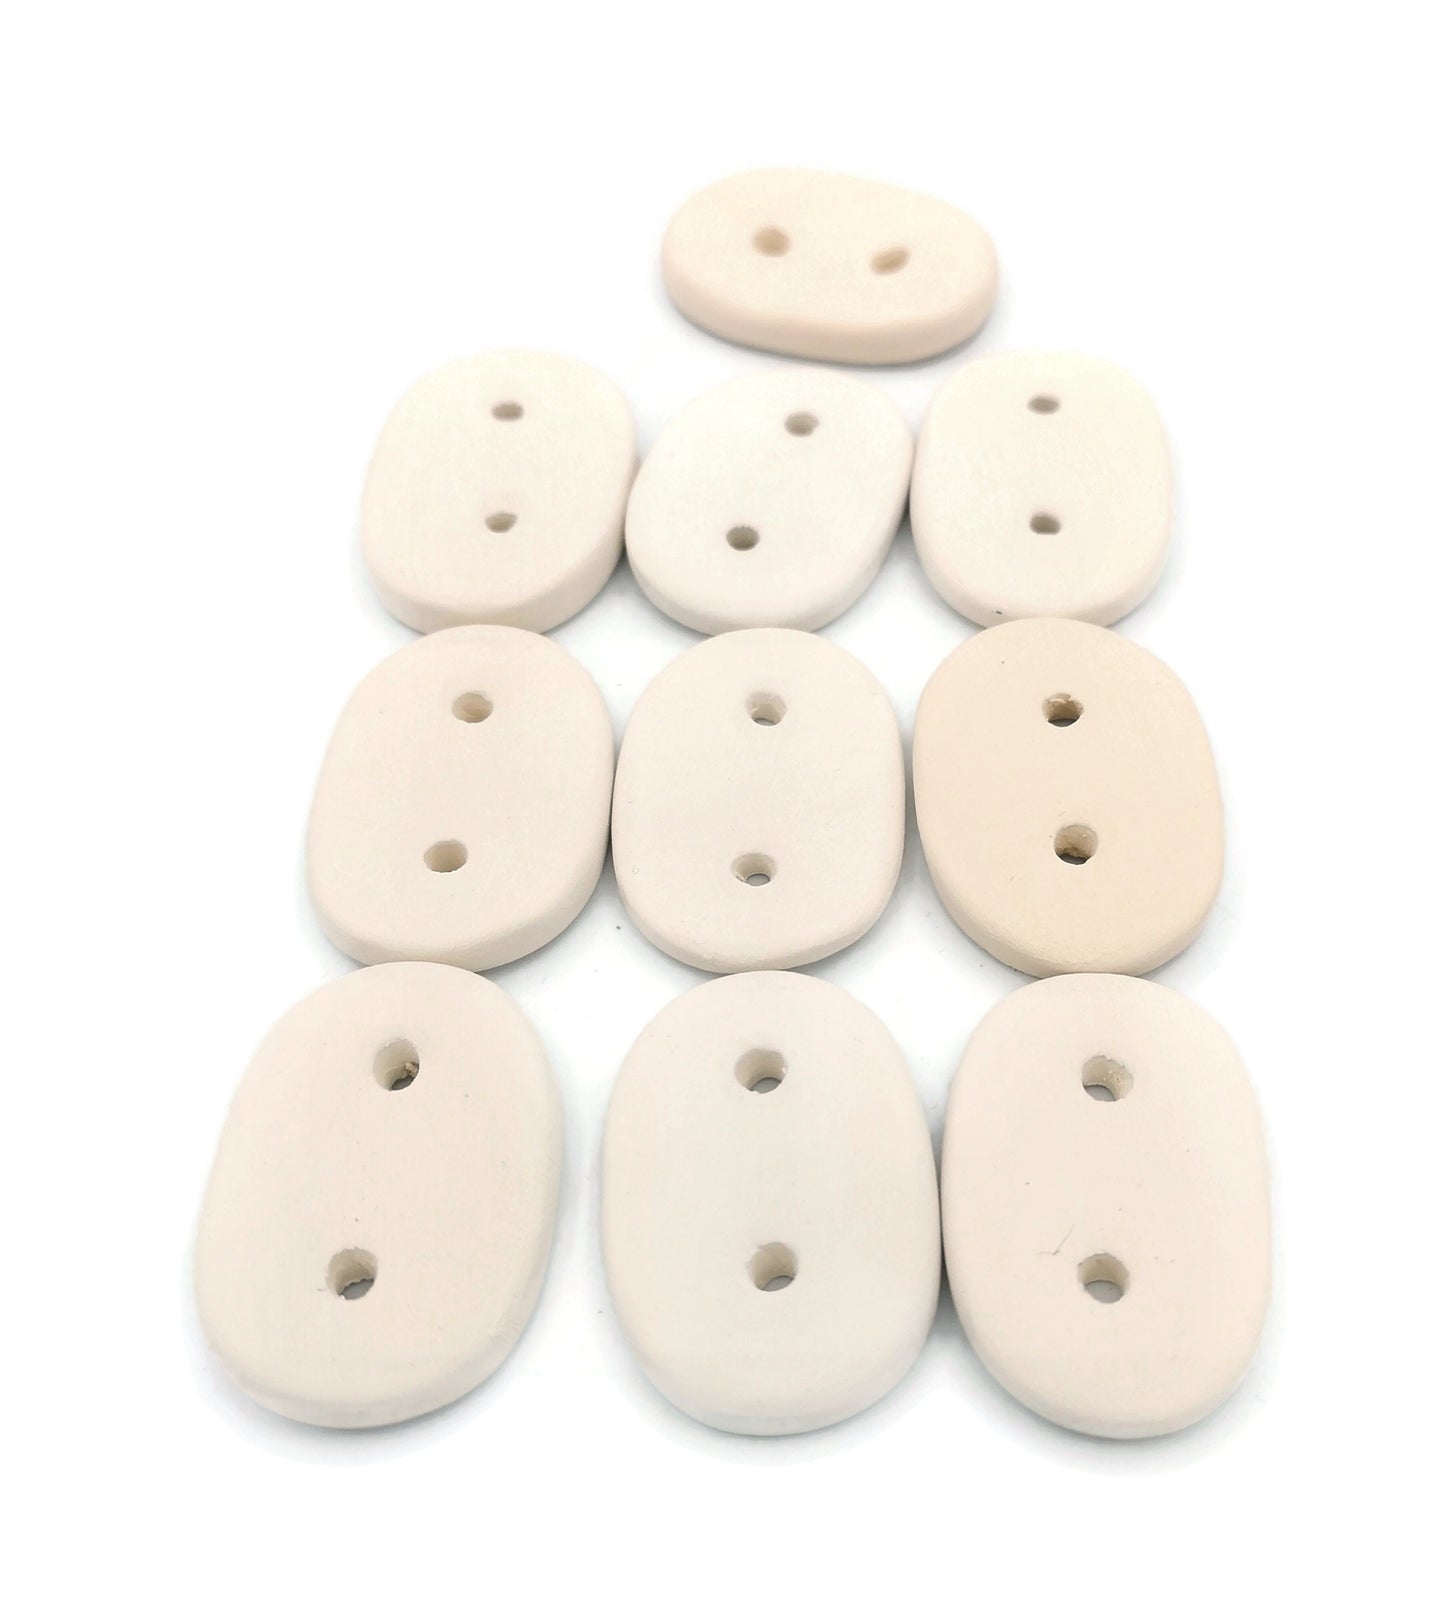 10Pc Large Oval Sewing Buttons, Custom Buttons Diy Craft Kit, Best Sellers, Handmade Ceramic Bisque Ready To Paint Sewing Notions - Ceramica Ana Rafael